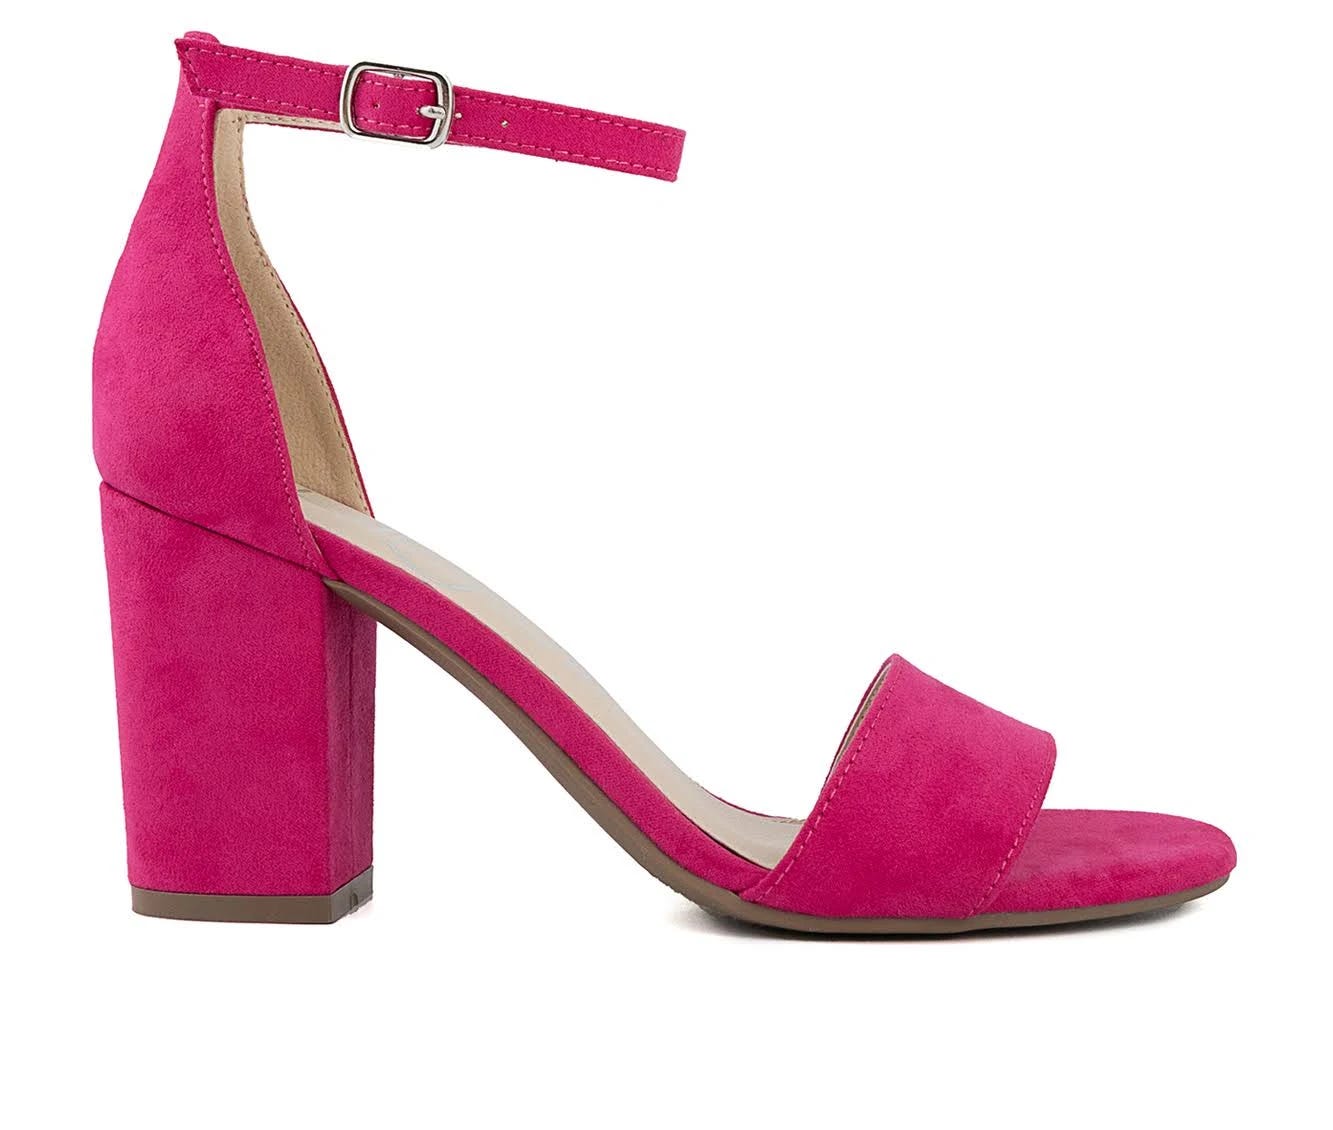 Fabulous Pink Fuschia Dressy Heels for Special Occasions | Image